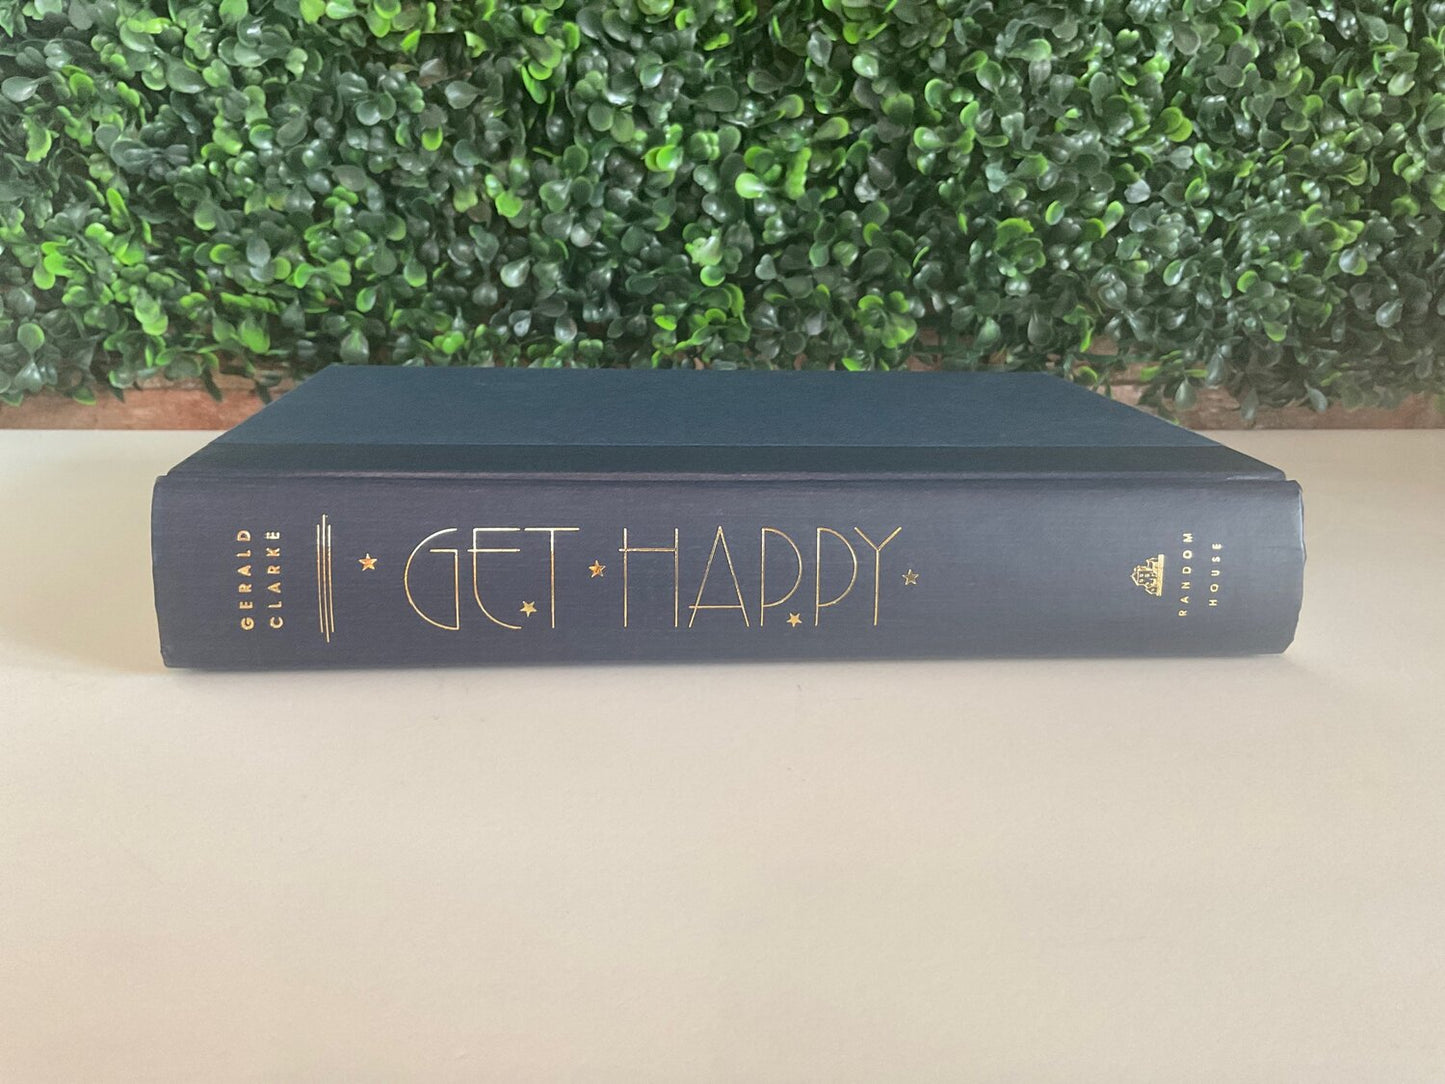 Get Happy: The Life of Judy Garland by Gerald Clarke